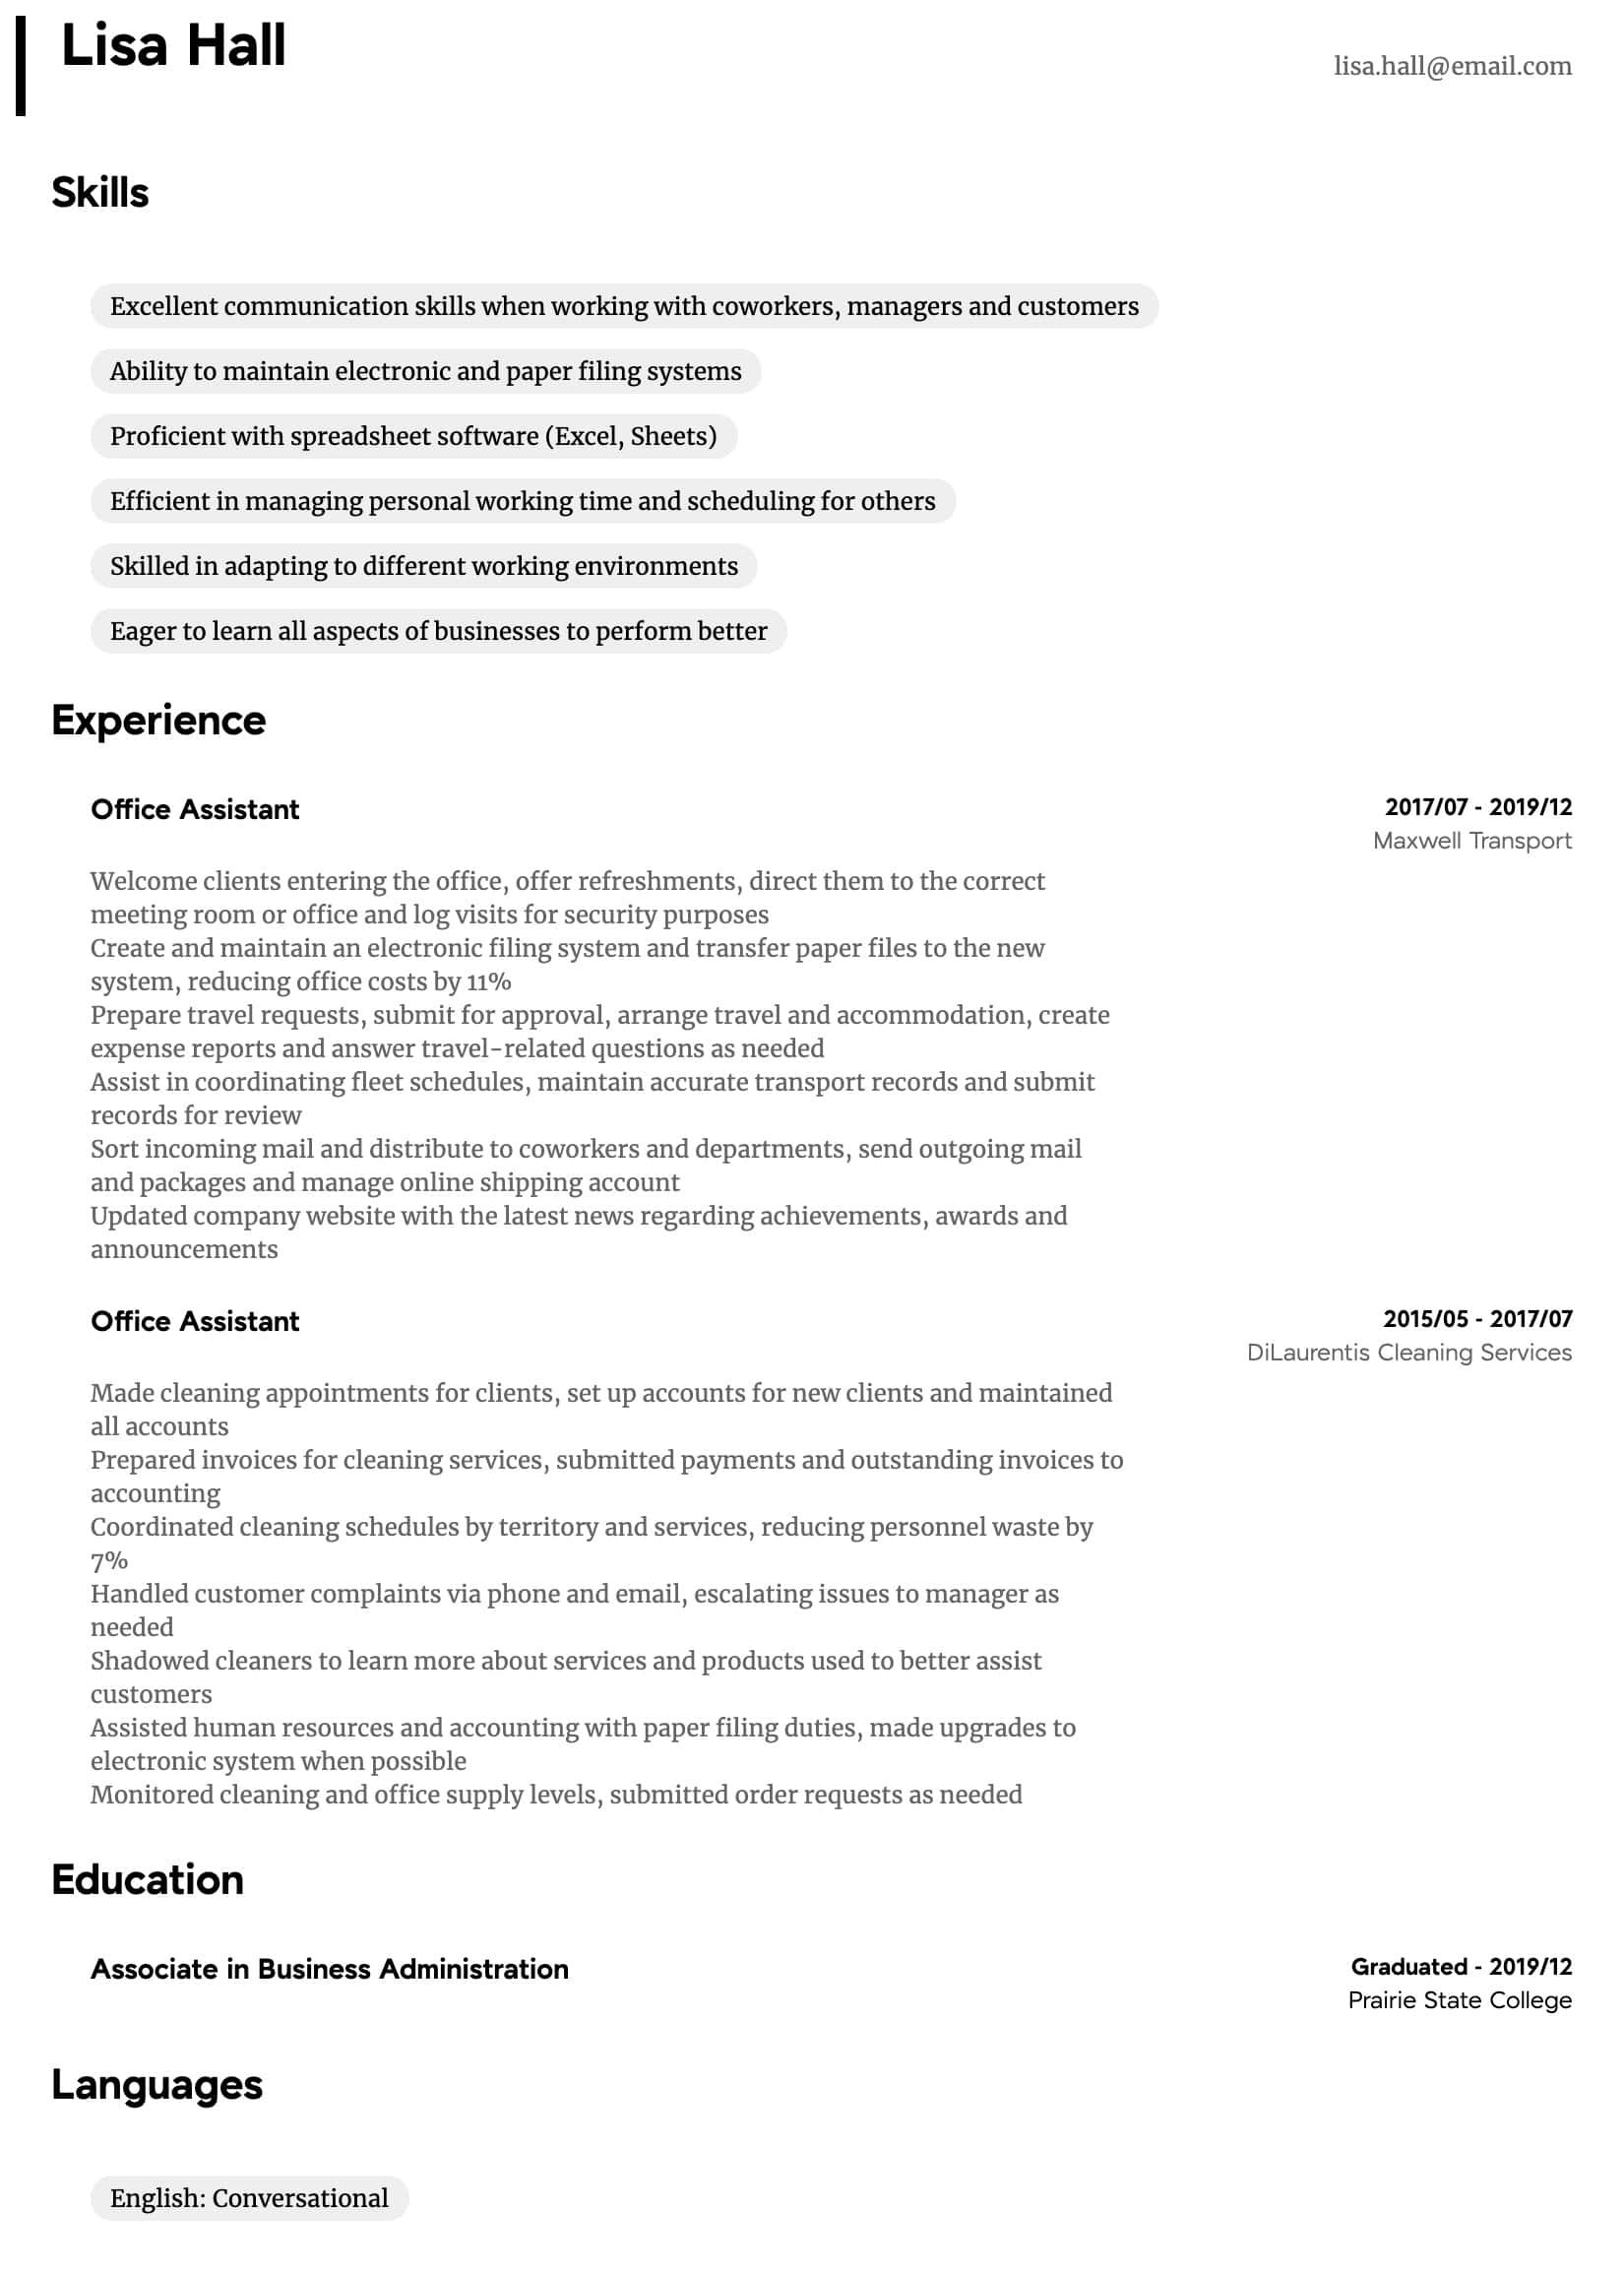 Office Assistant Resume Samples